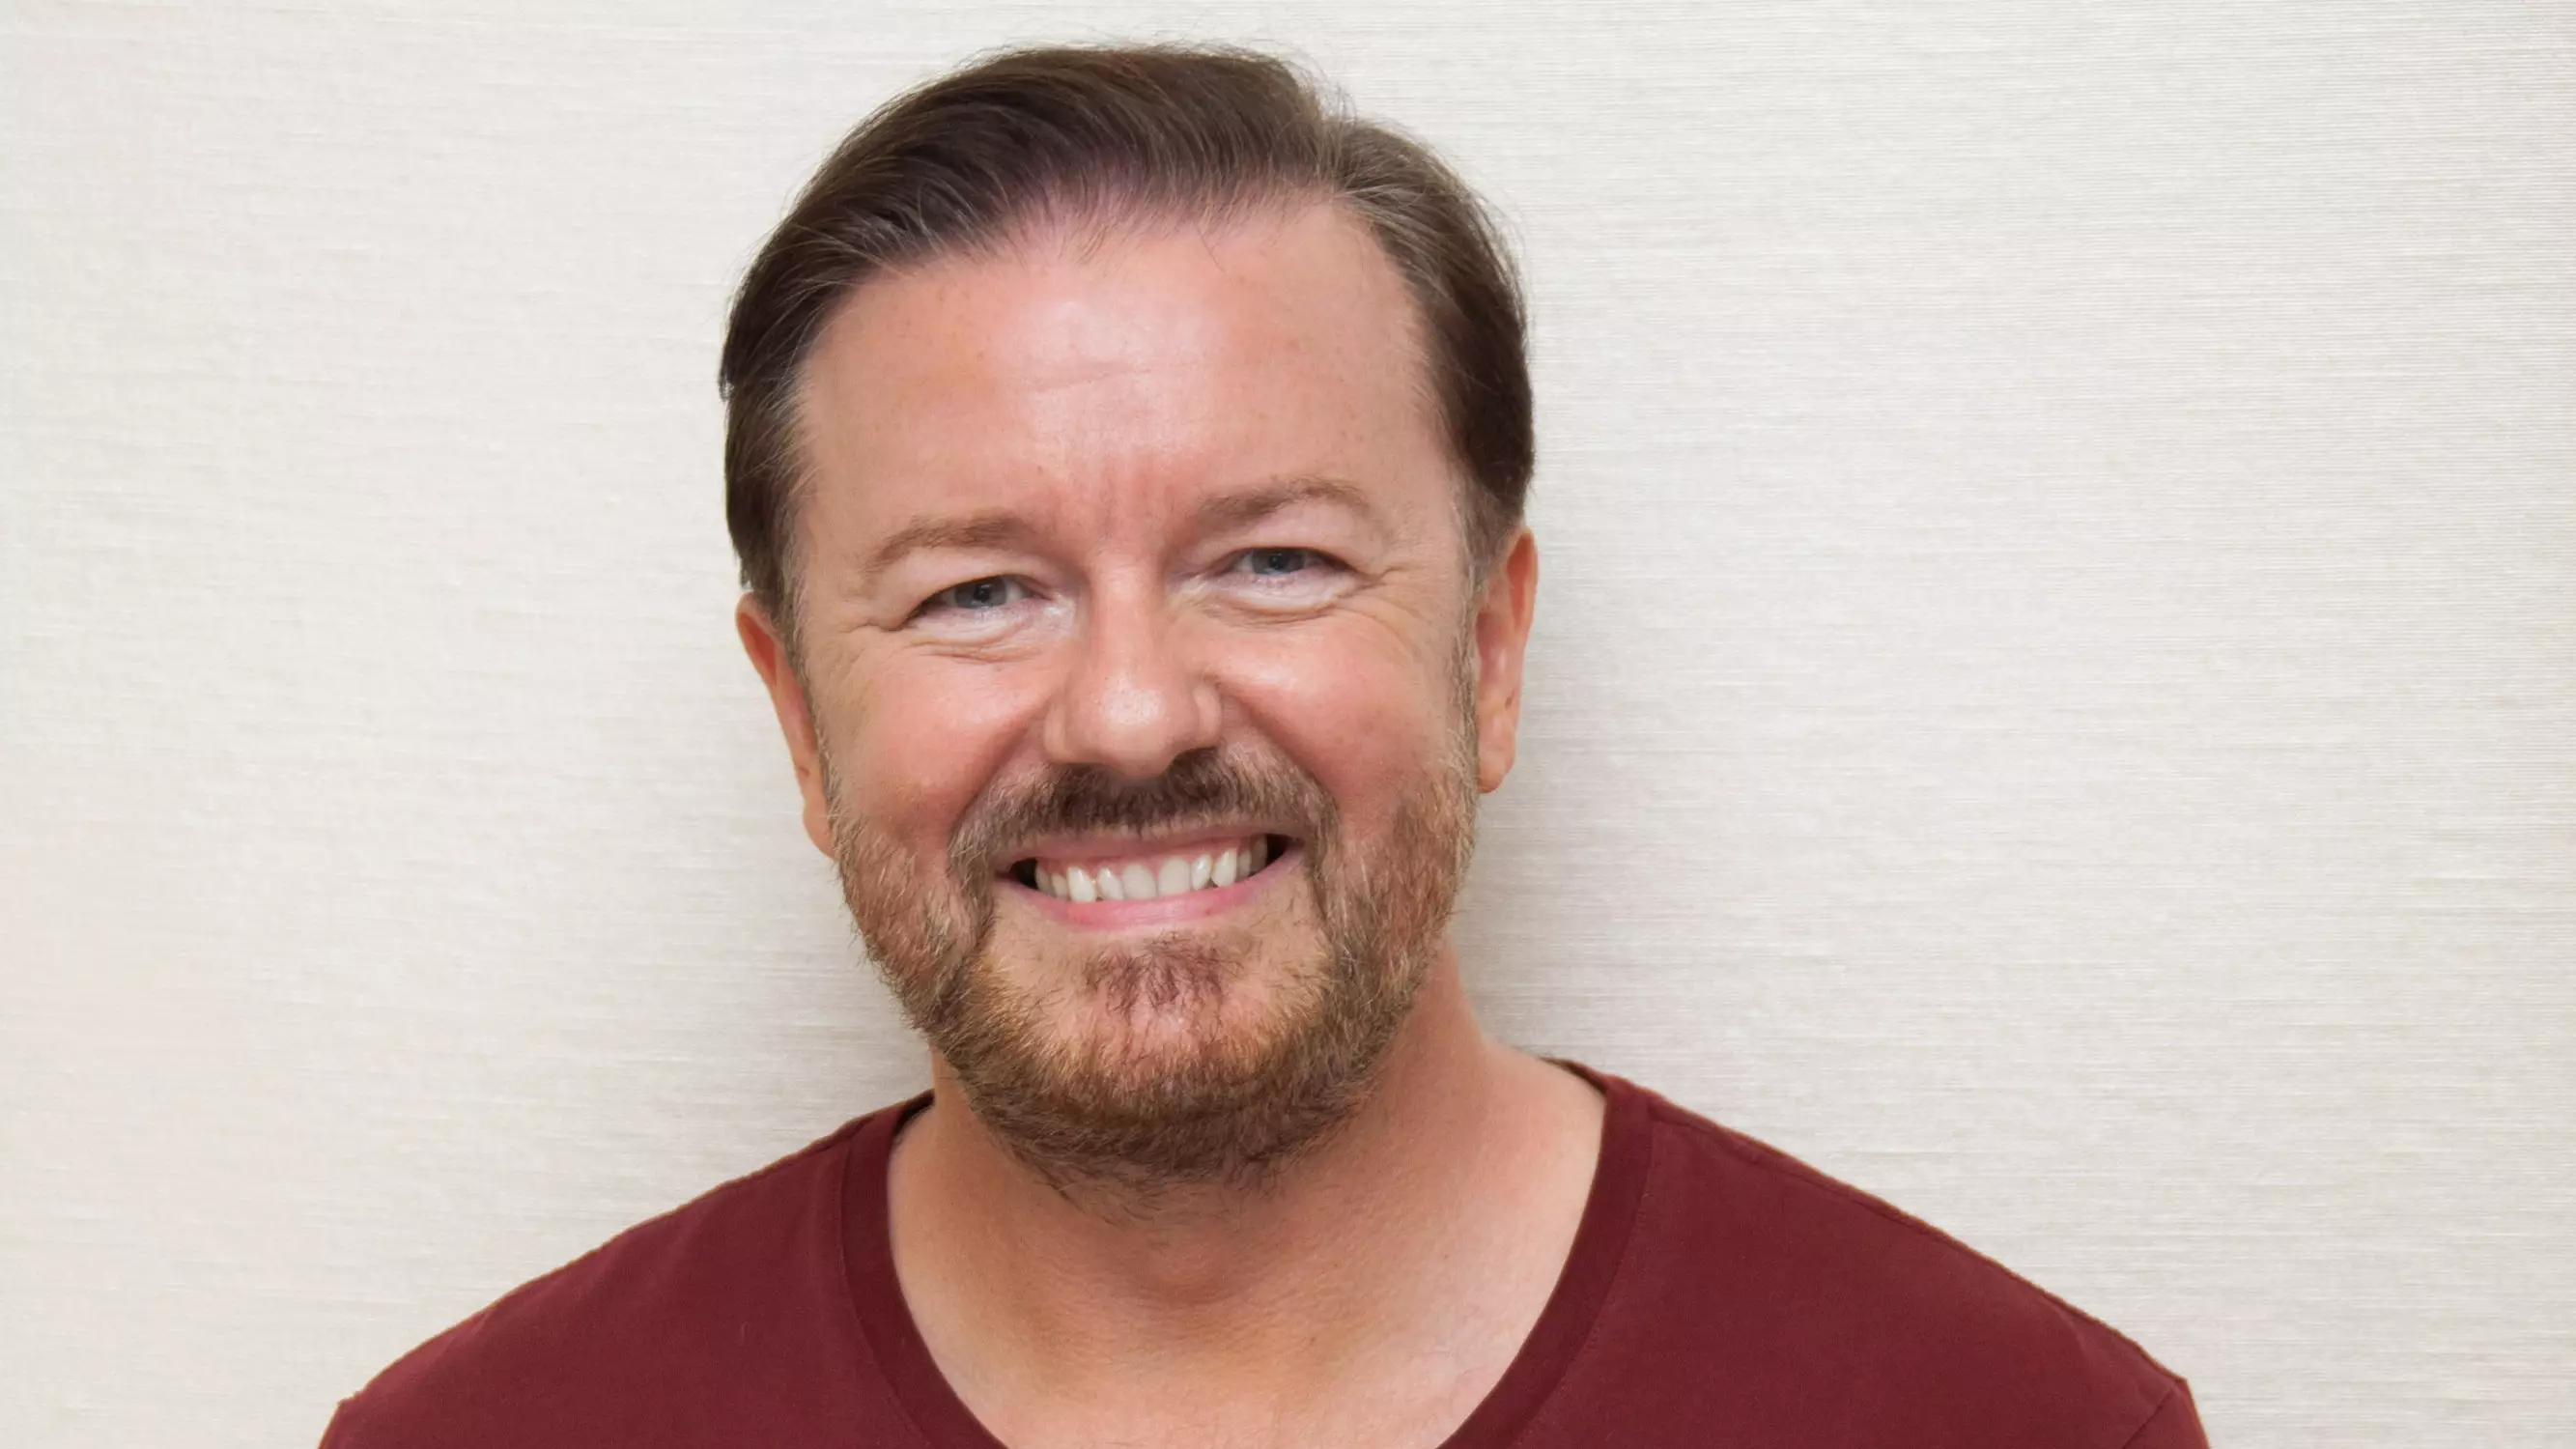 Ricky Gervais Tweets Shocking Video Of Dog Being Slaughtered 